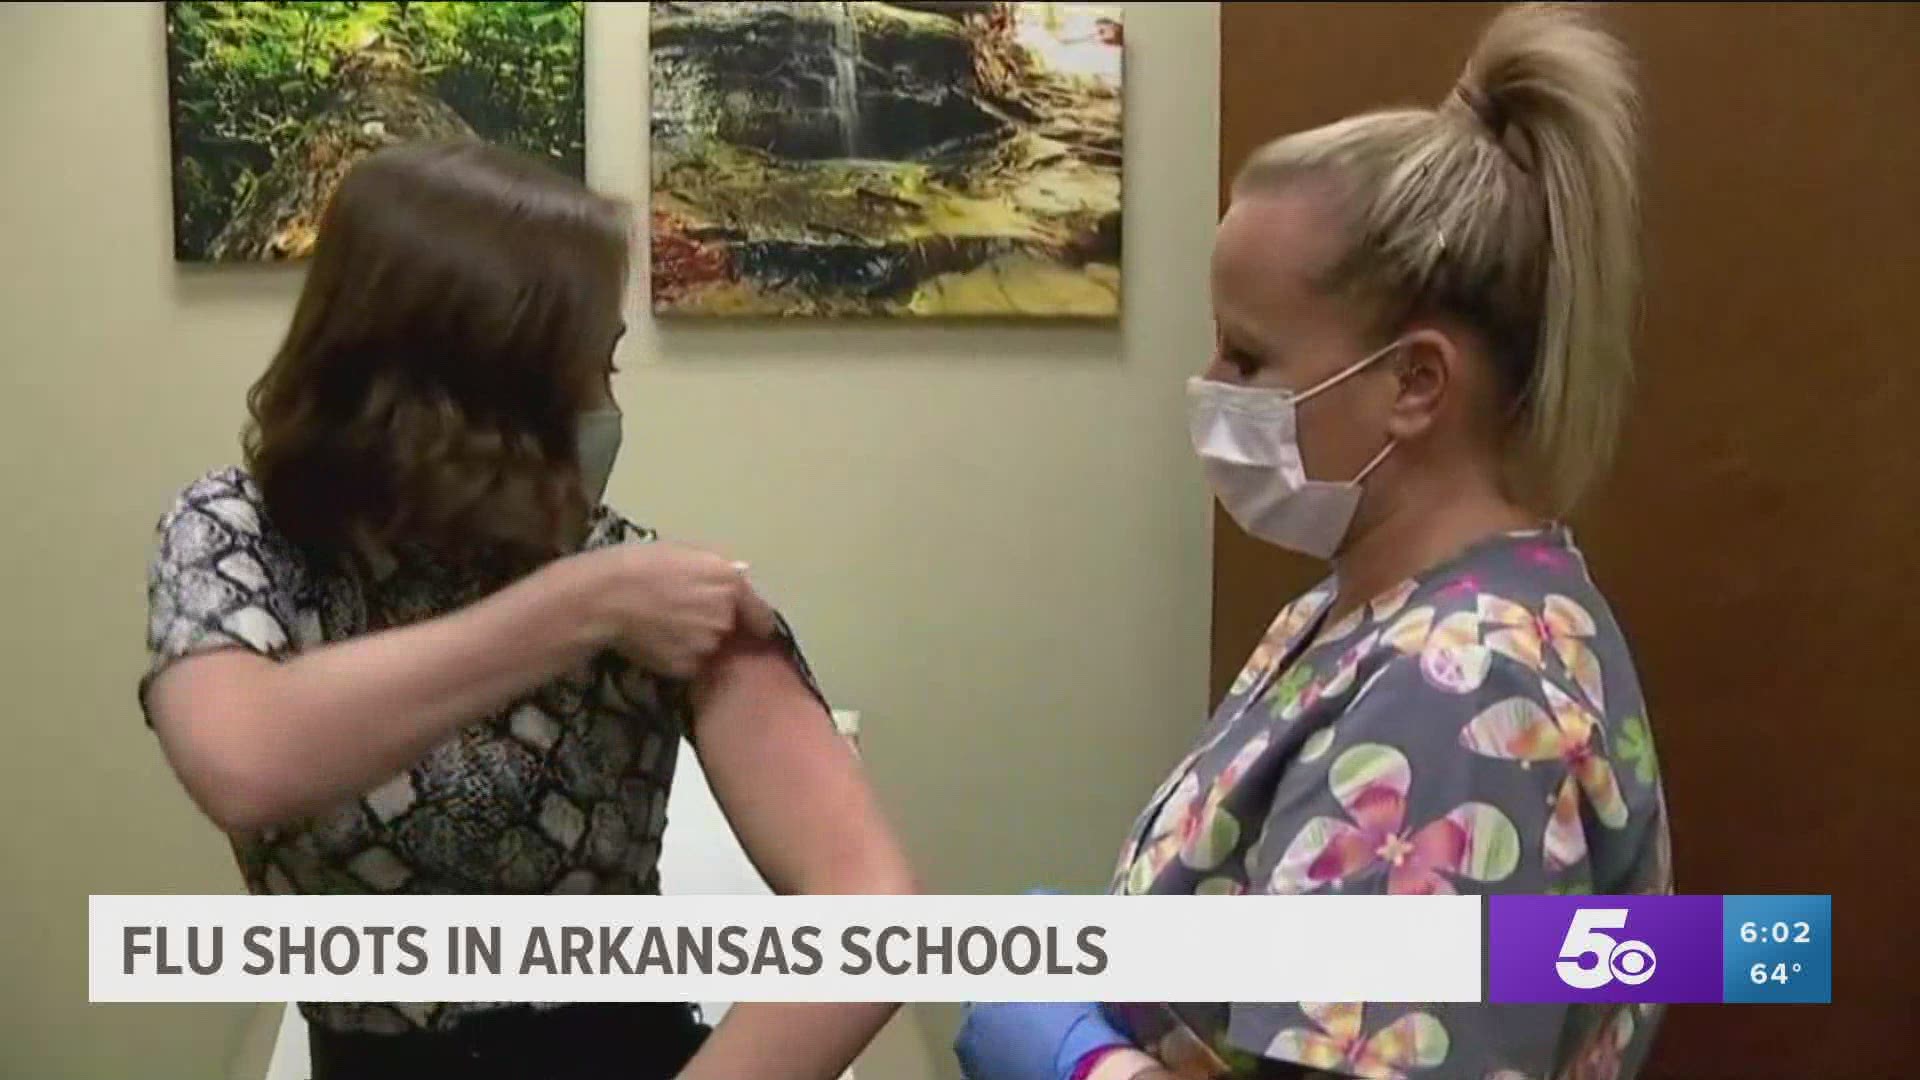 With flu season right around the corner, some local schools are offering the flu vaccine for students. https://bit.ly/3cDf8hP